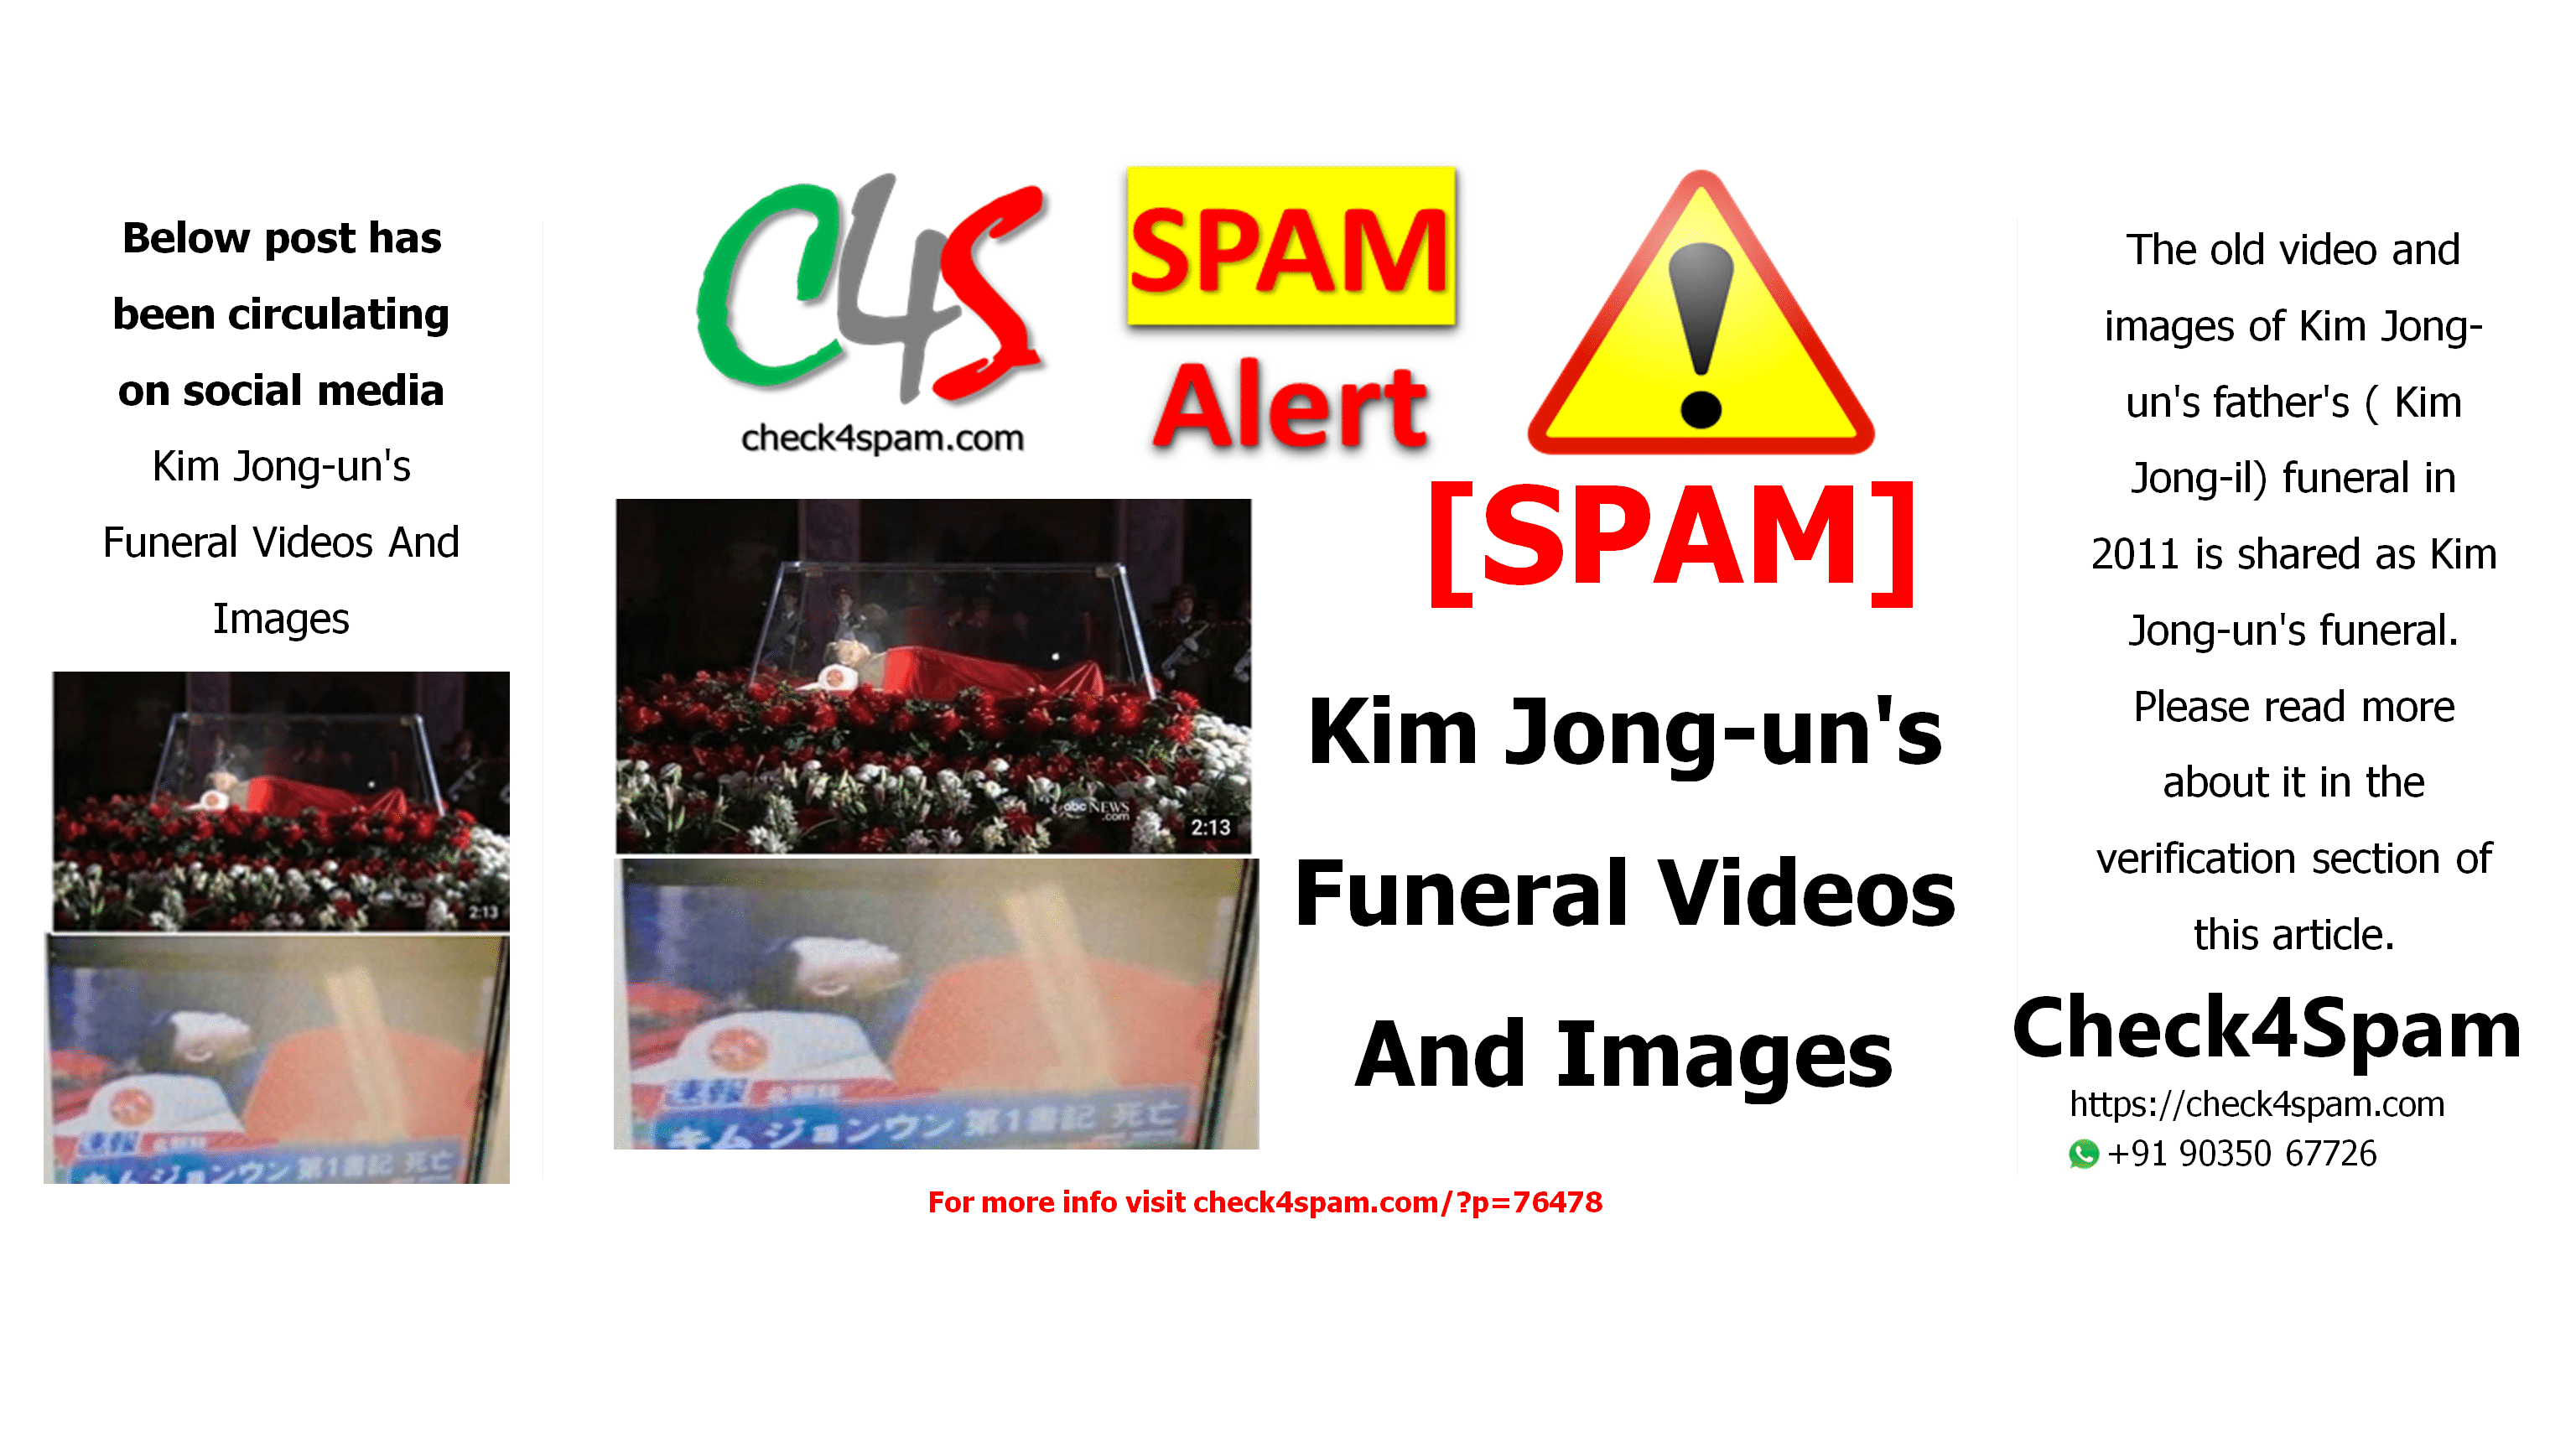 Kim Jong-un's Funeral Videos And Images